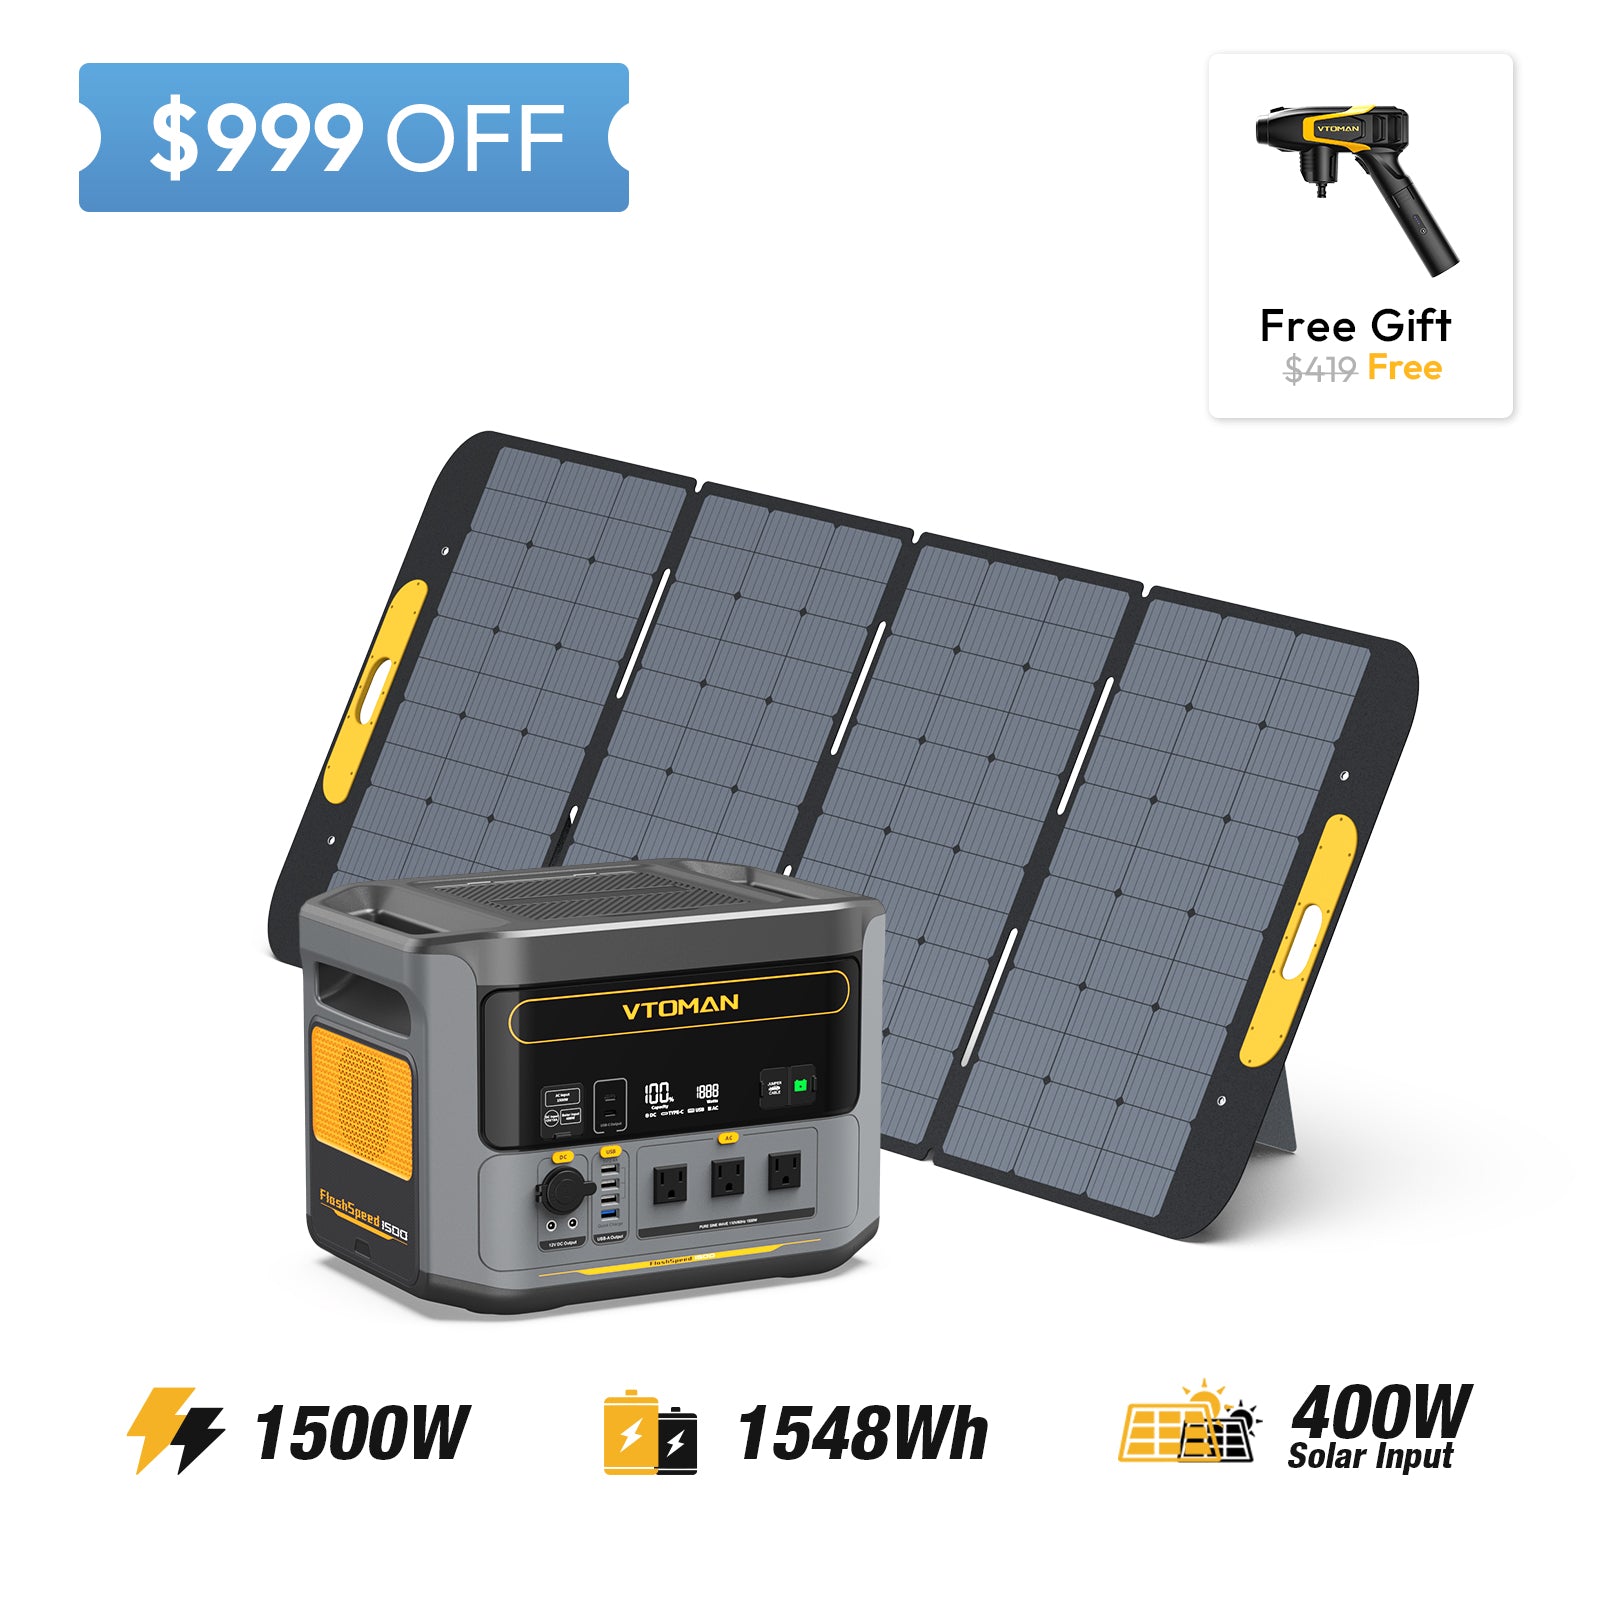 FlashSpeed 1500 and 400w solar pane save $999 in summer sale